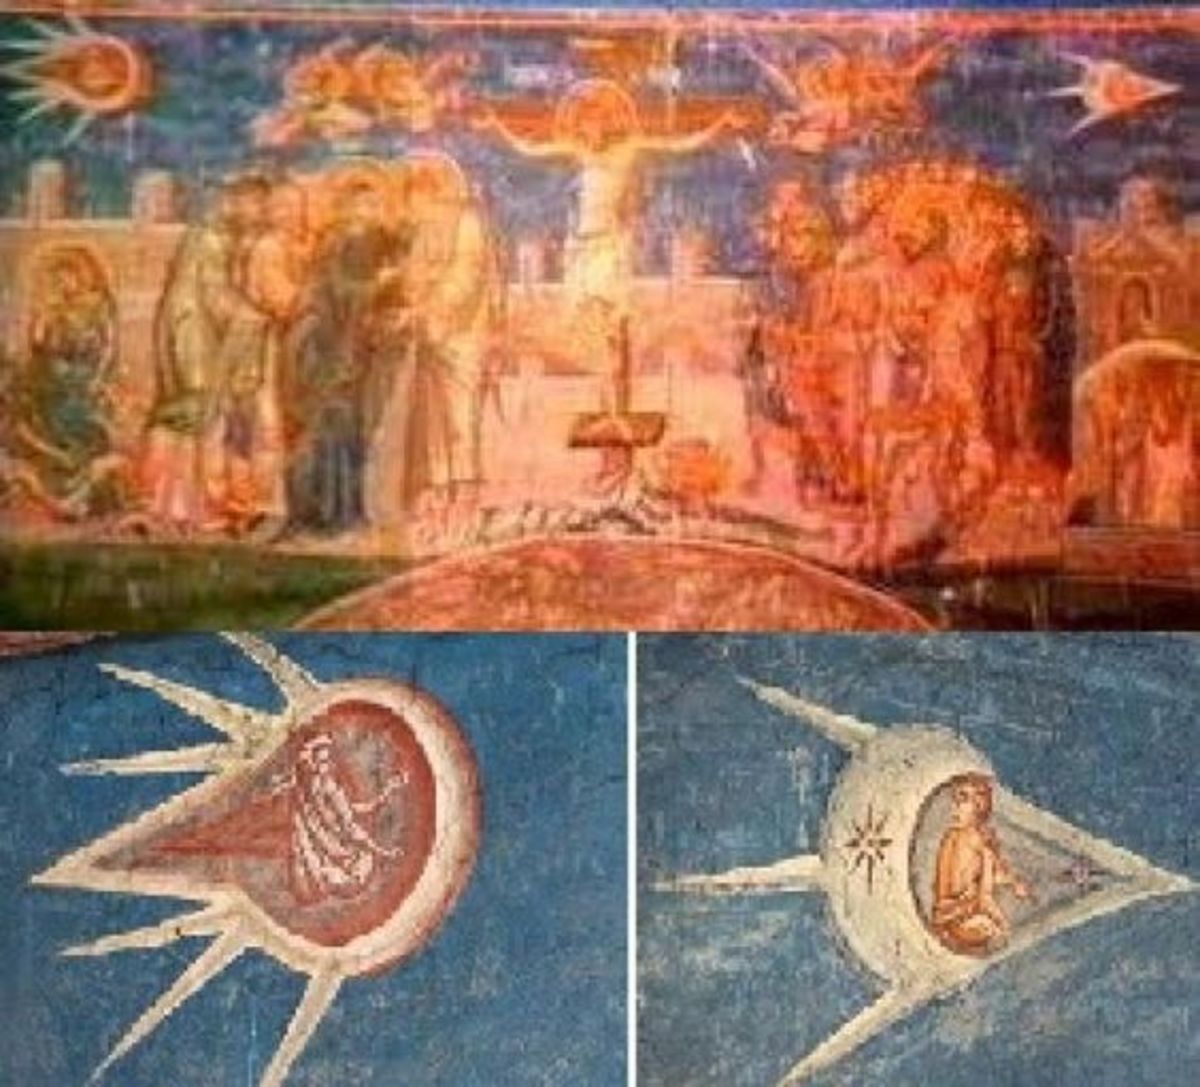 UFOs are displayed in upper corners of old painting of Christ's crucifixion. Artist name is unknown. Date of painting is unknown.